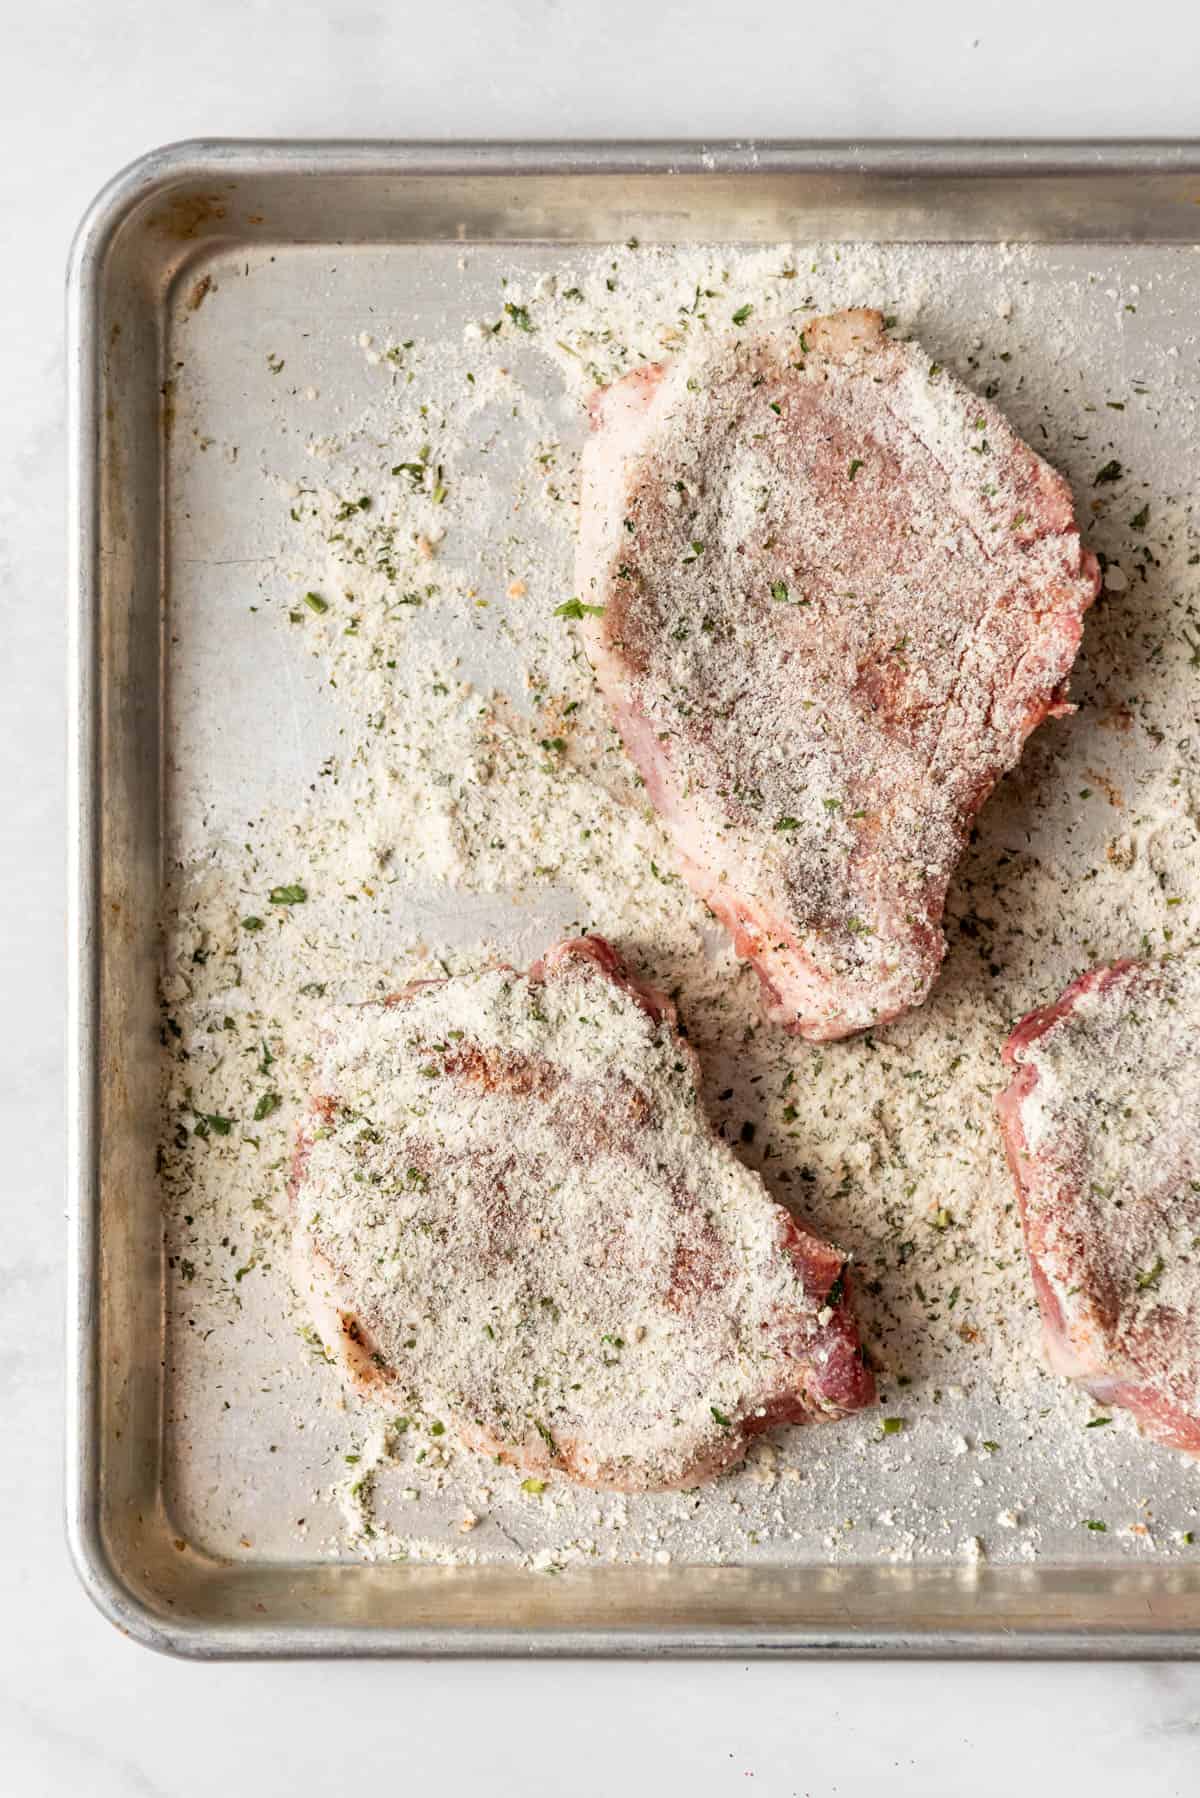 Uncooked pork chops dredges in powdered ranch seasoning mix.